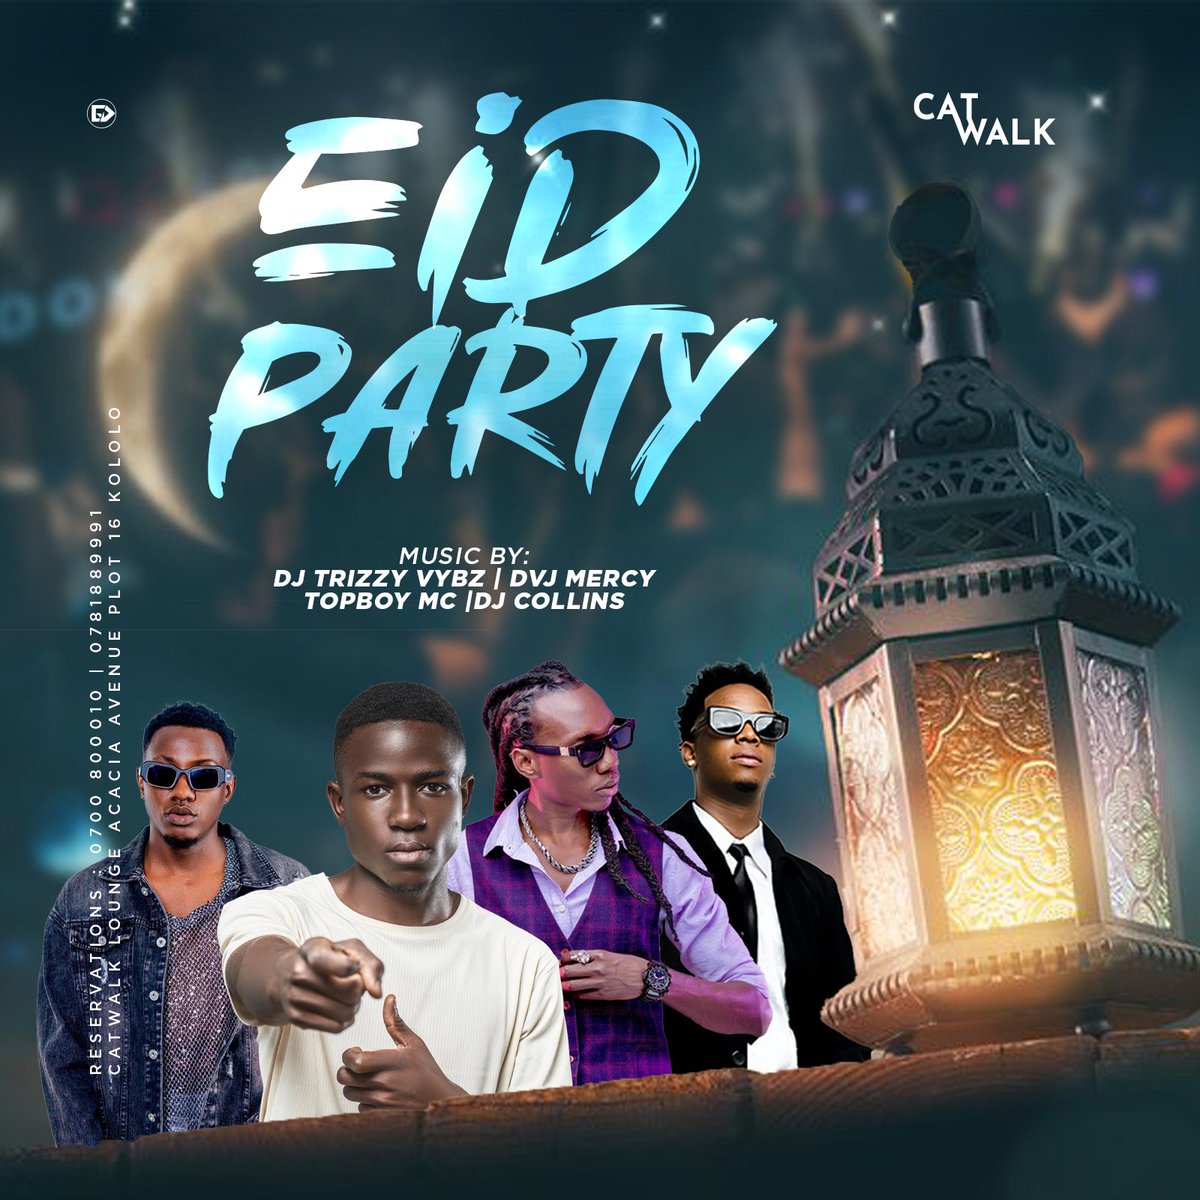 Don’t miss the Eid day party night at catwalk lounge kololo come break the fast season with us with @dvjmercypro , @djay_trizzy_vybz , @djcollin @topboymcofficiall